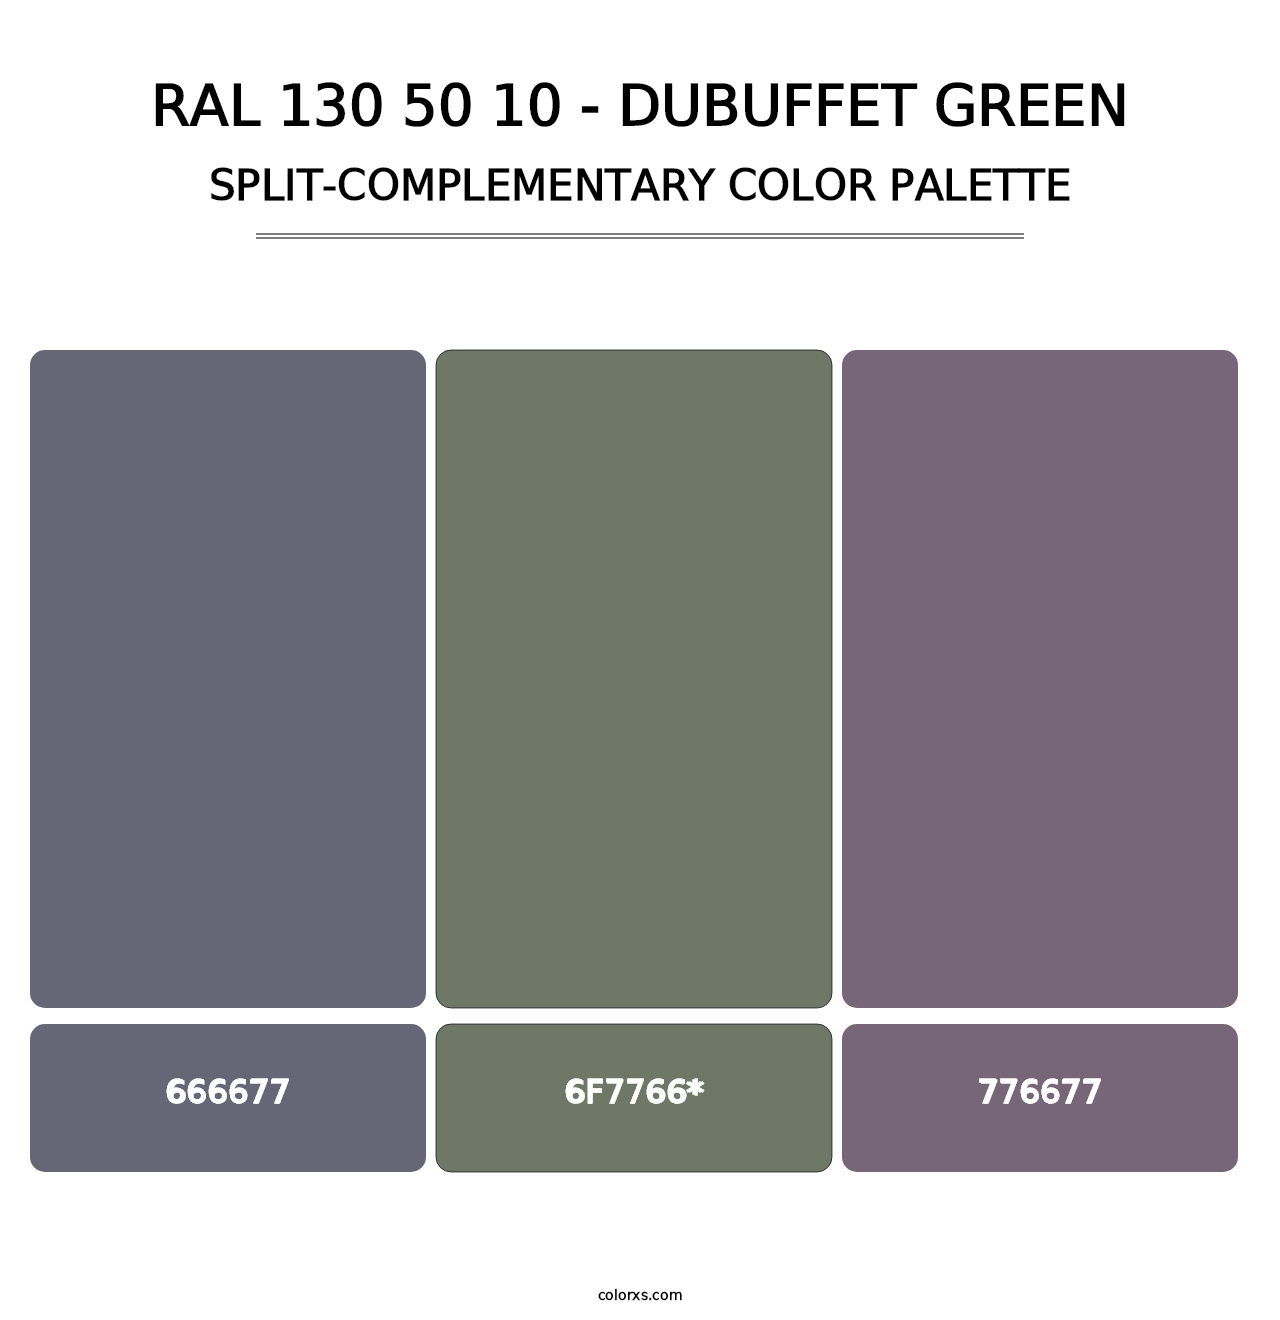 RAL 130 50 10 - Dubuffet Green - Split-Complementary Color Palette